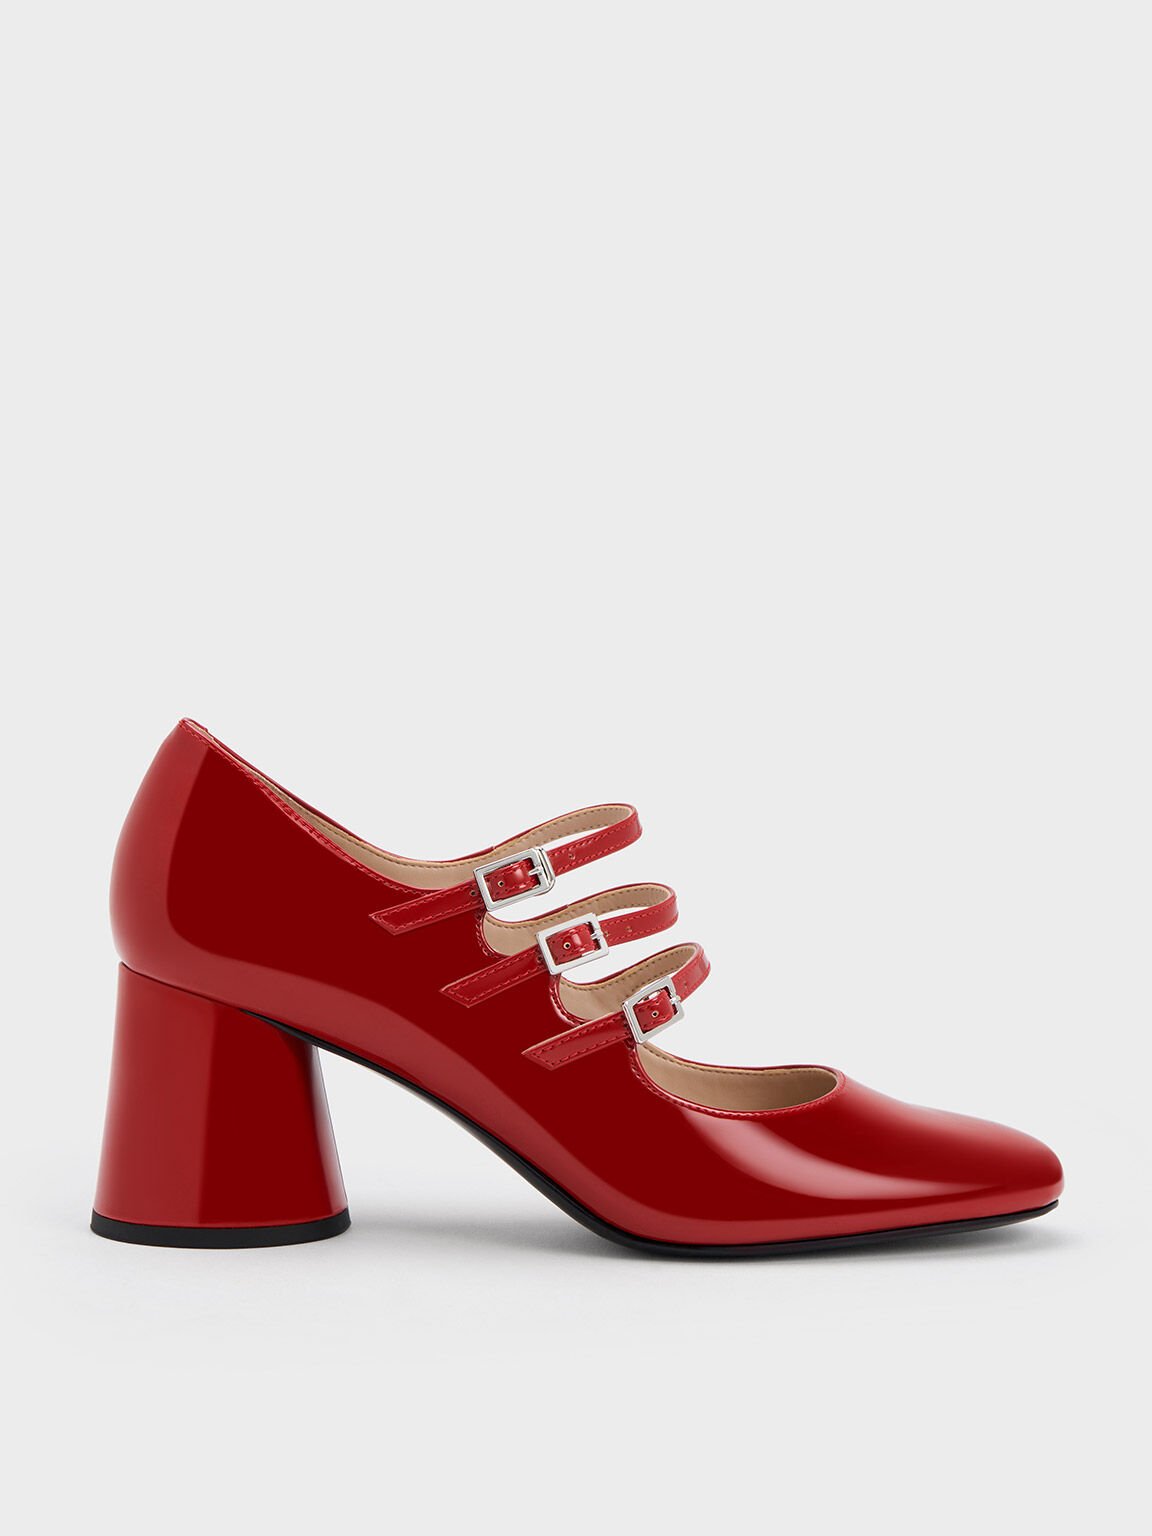 Buckled Cylindrical Heel Mary Janes, Red, hi-res